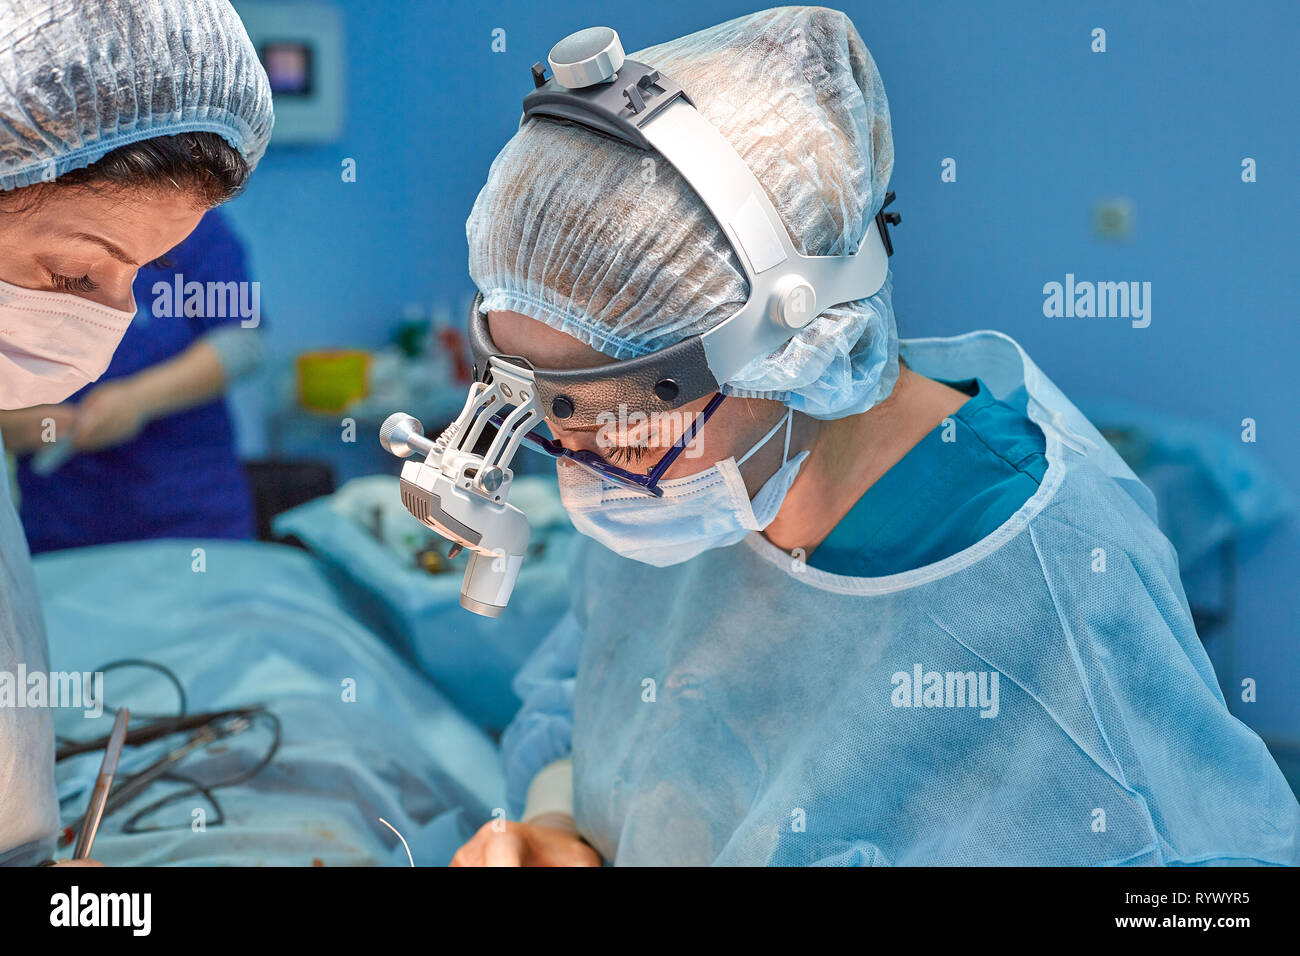 Professional smart intelligent surgeons standing near the patient and performing an operation while saving his life Stock Photo